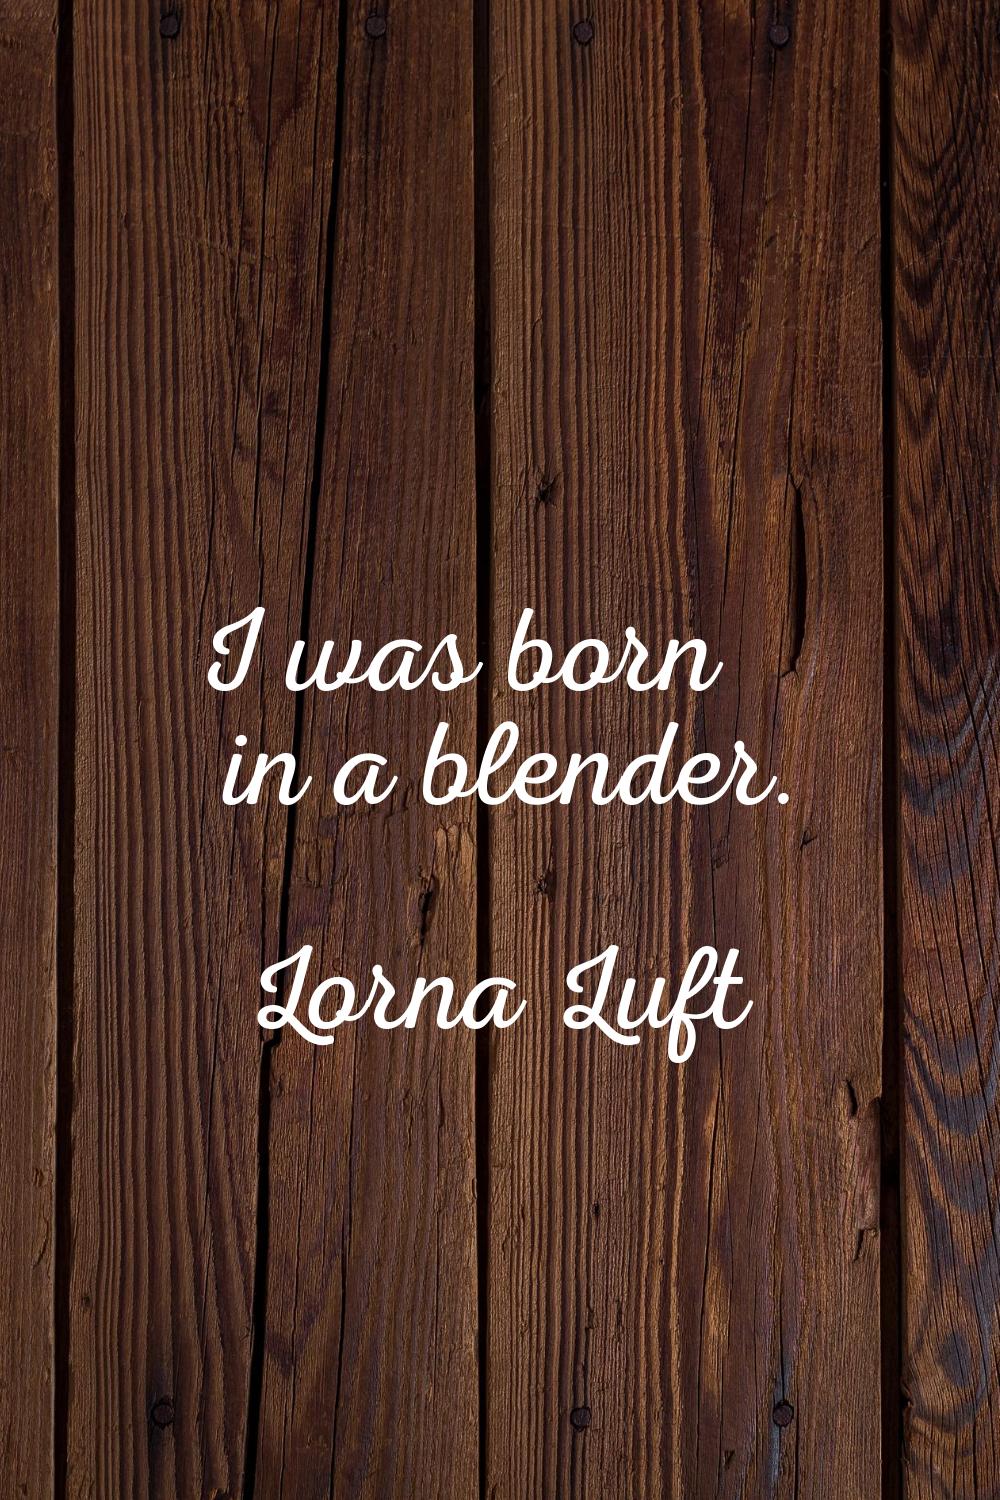 I was born in a blender.